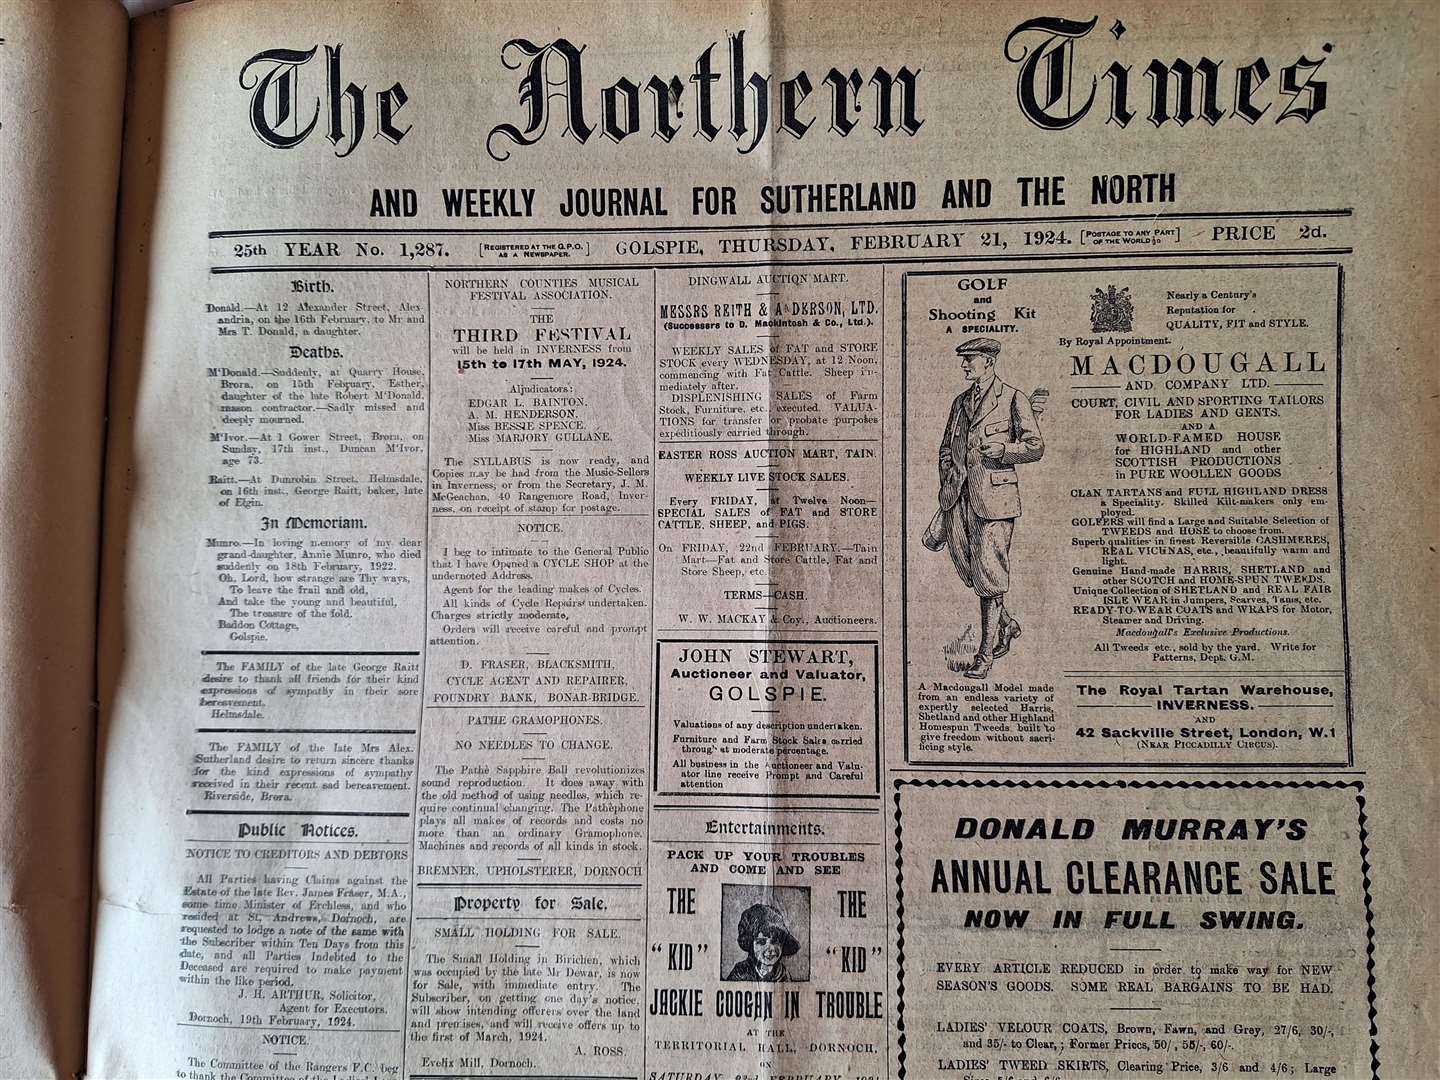 The edition of February 21, 1924.